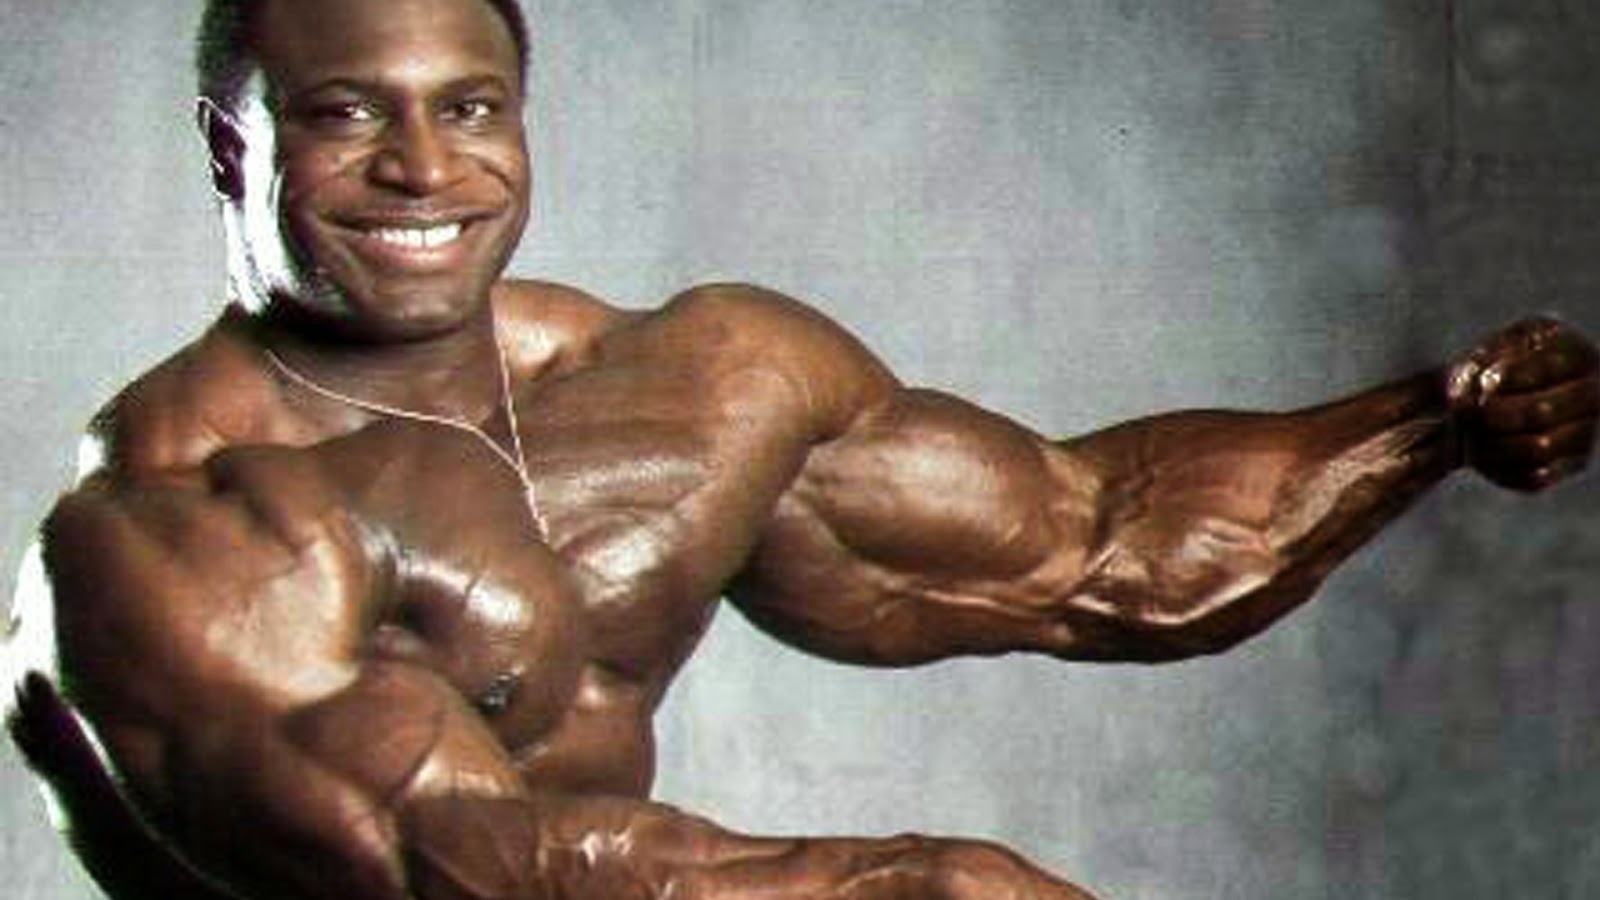 Body Building Top 15 Biggest Bodybuilders of All Time